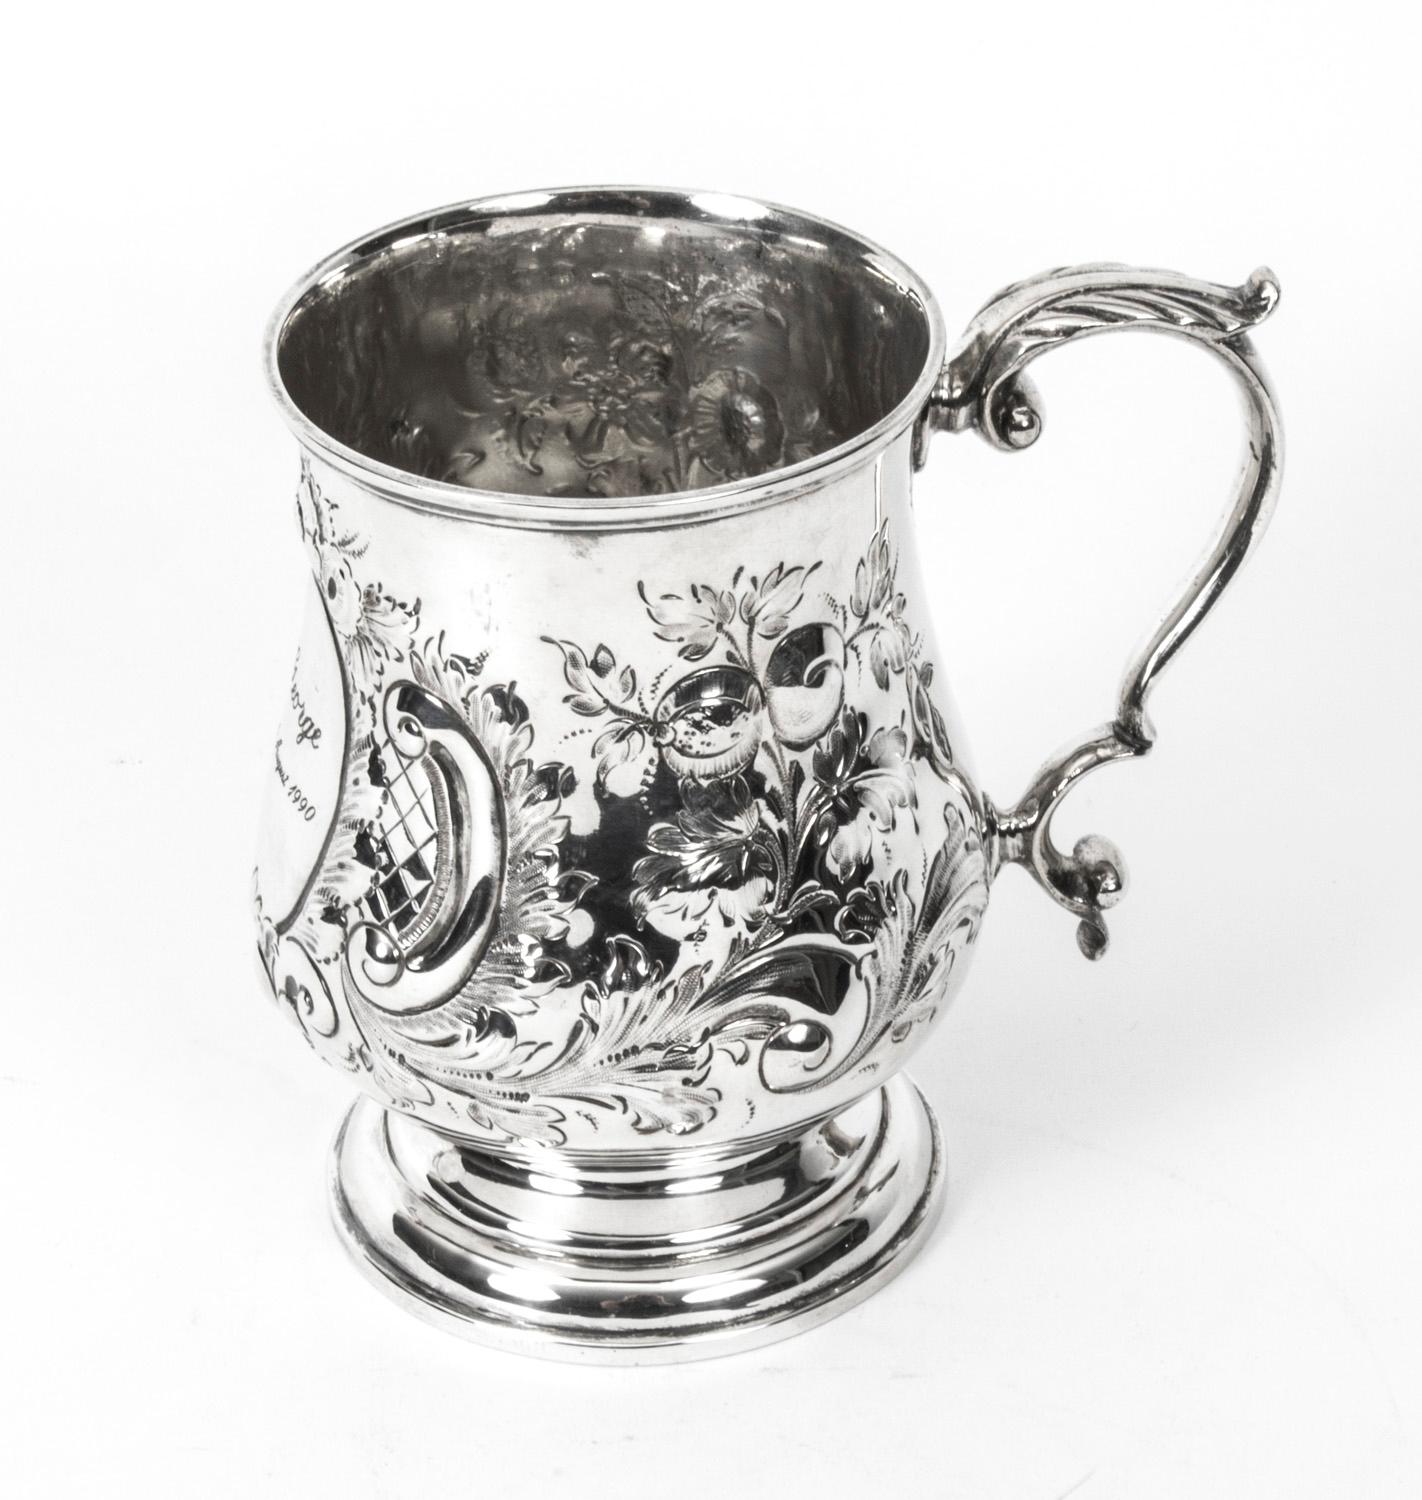 Antique Victorian Silver Plated Embossed and Engraved Mug 19th Century For Sale 5